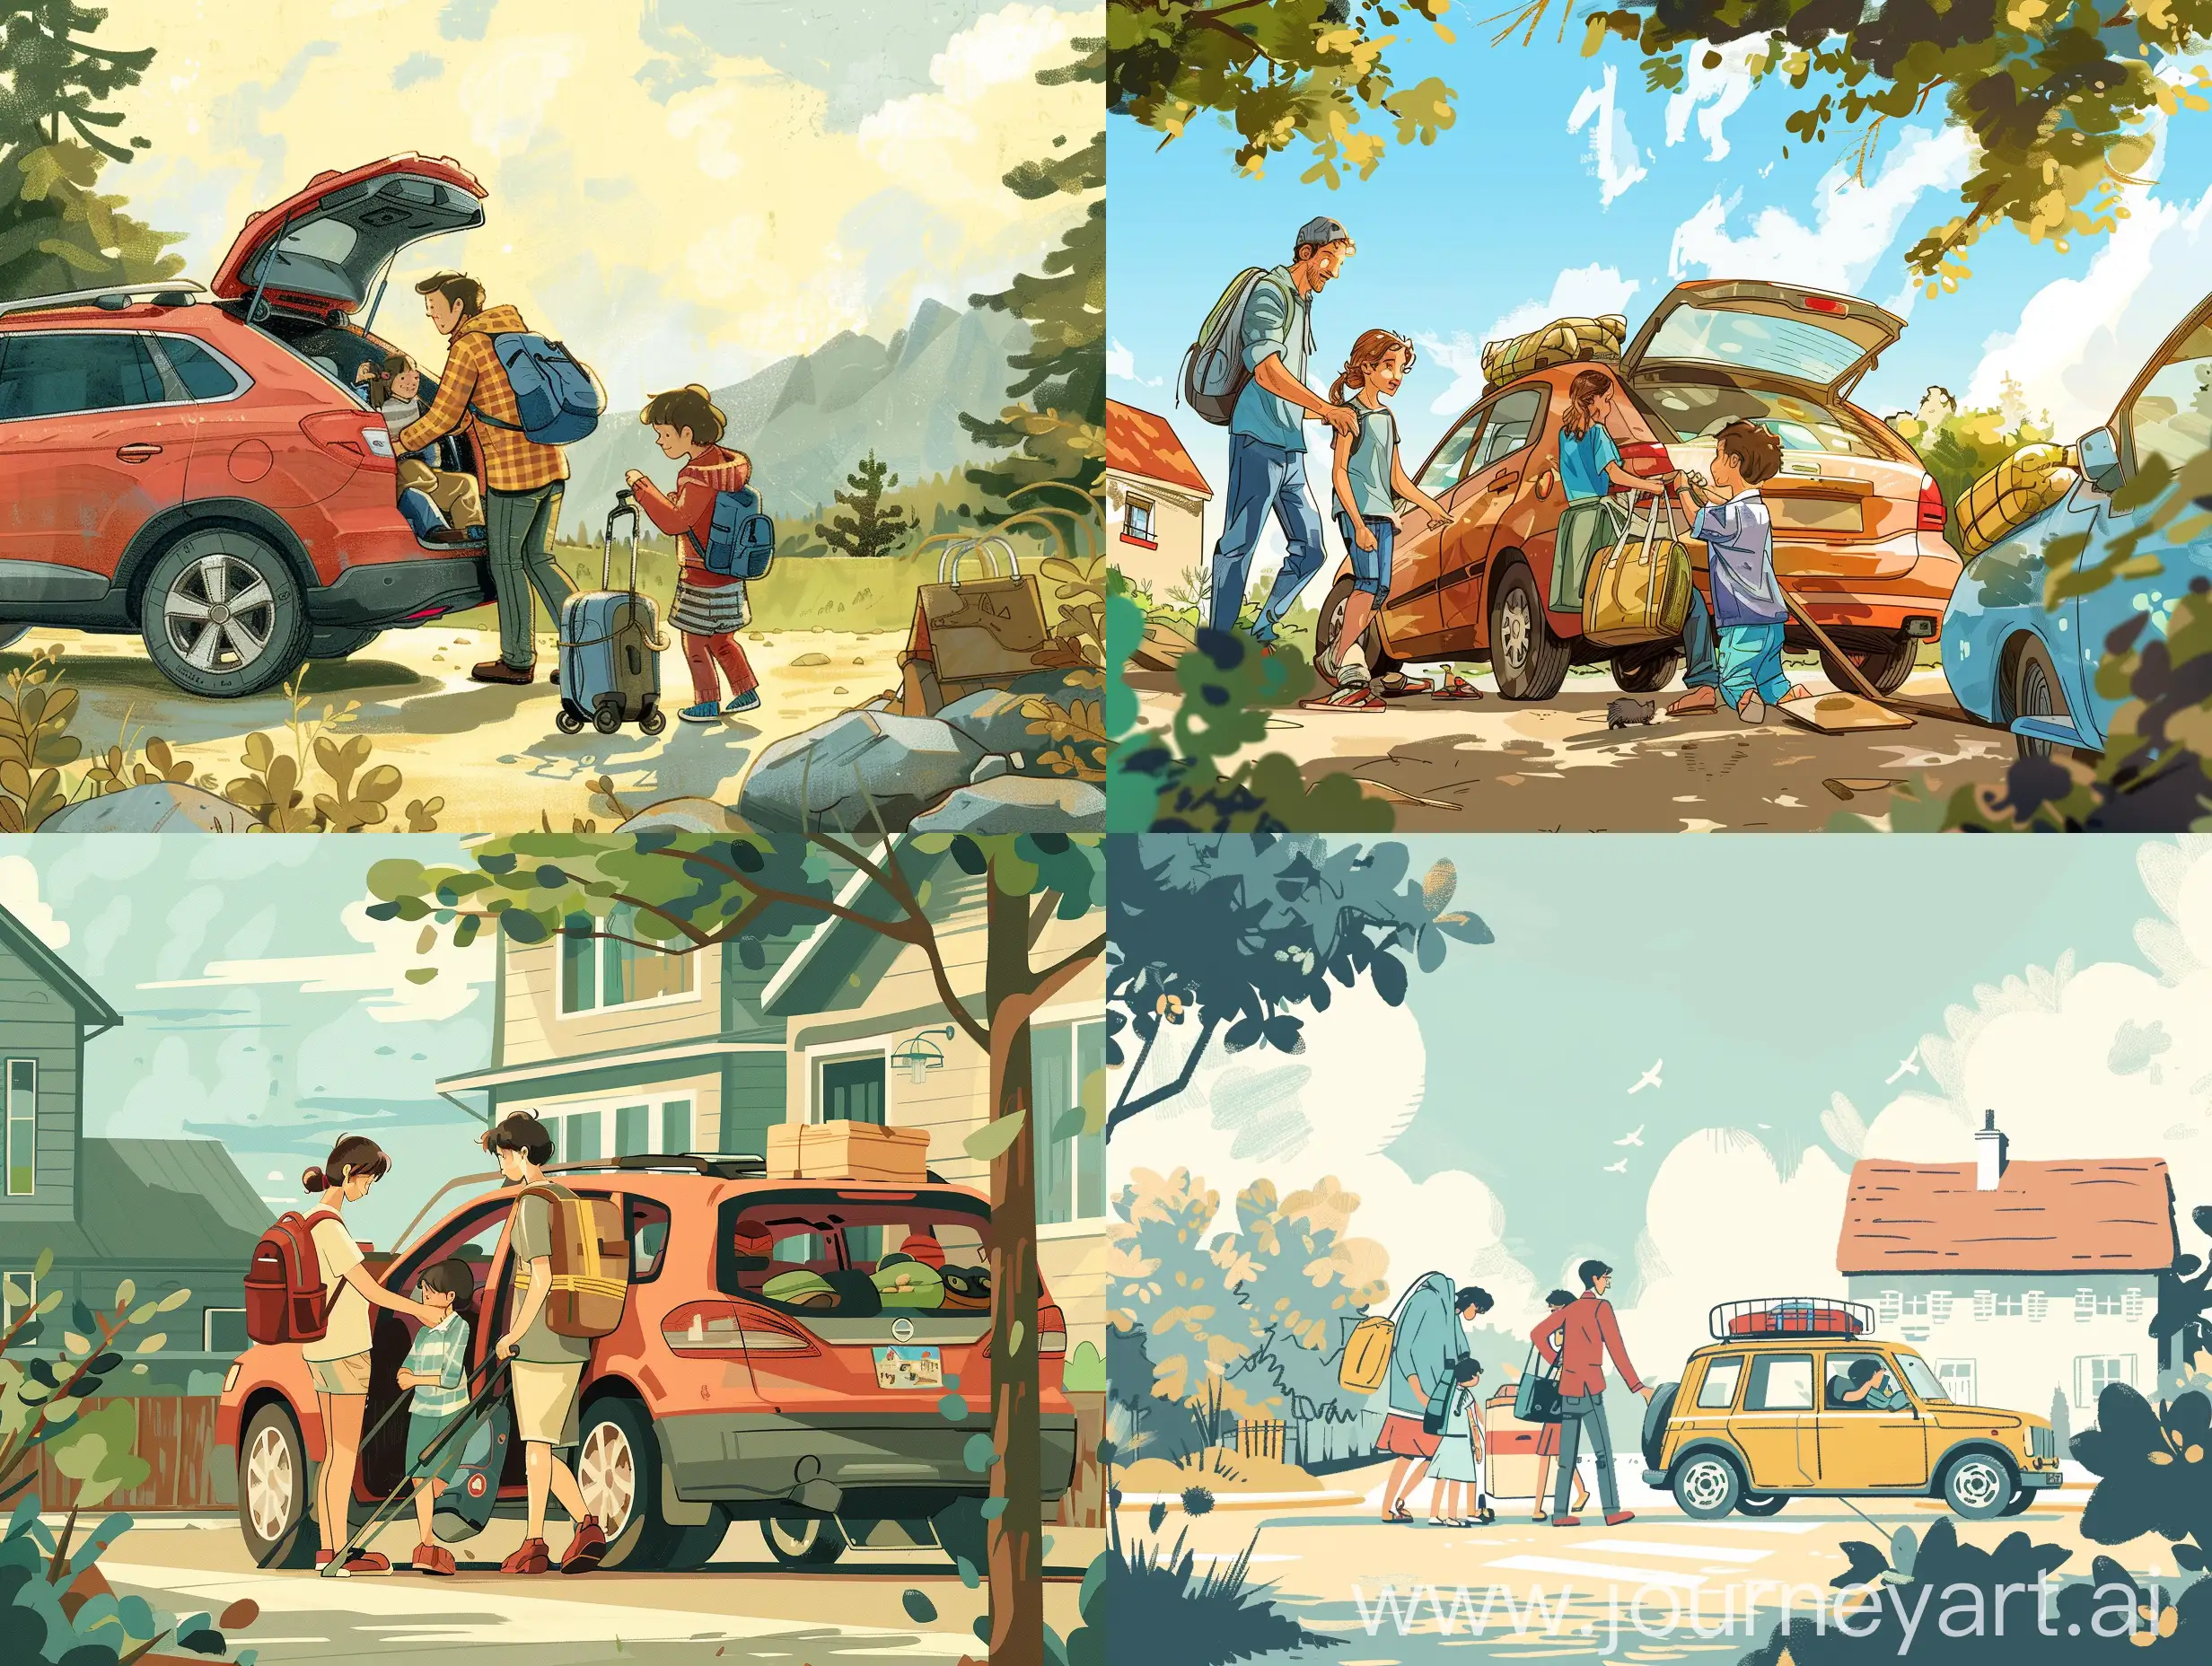 Start with a scene of a family loading up their car, capturing the anticipation and excitement of the journey ahead.